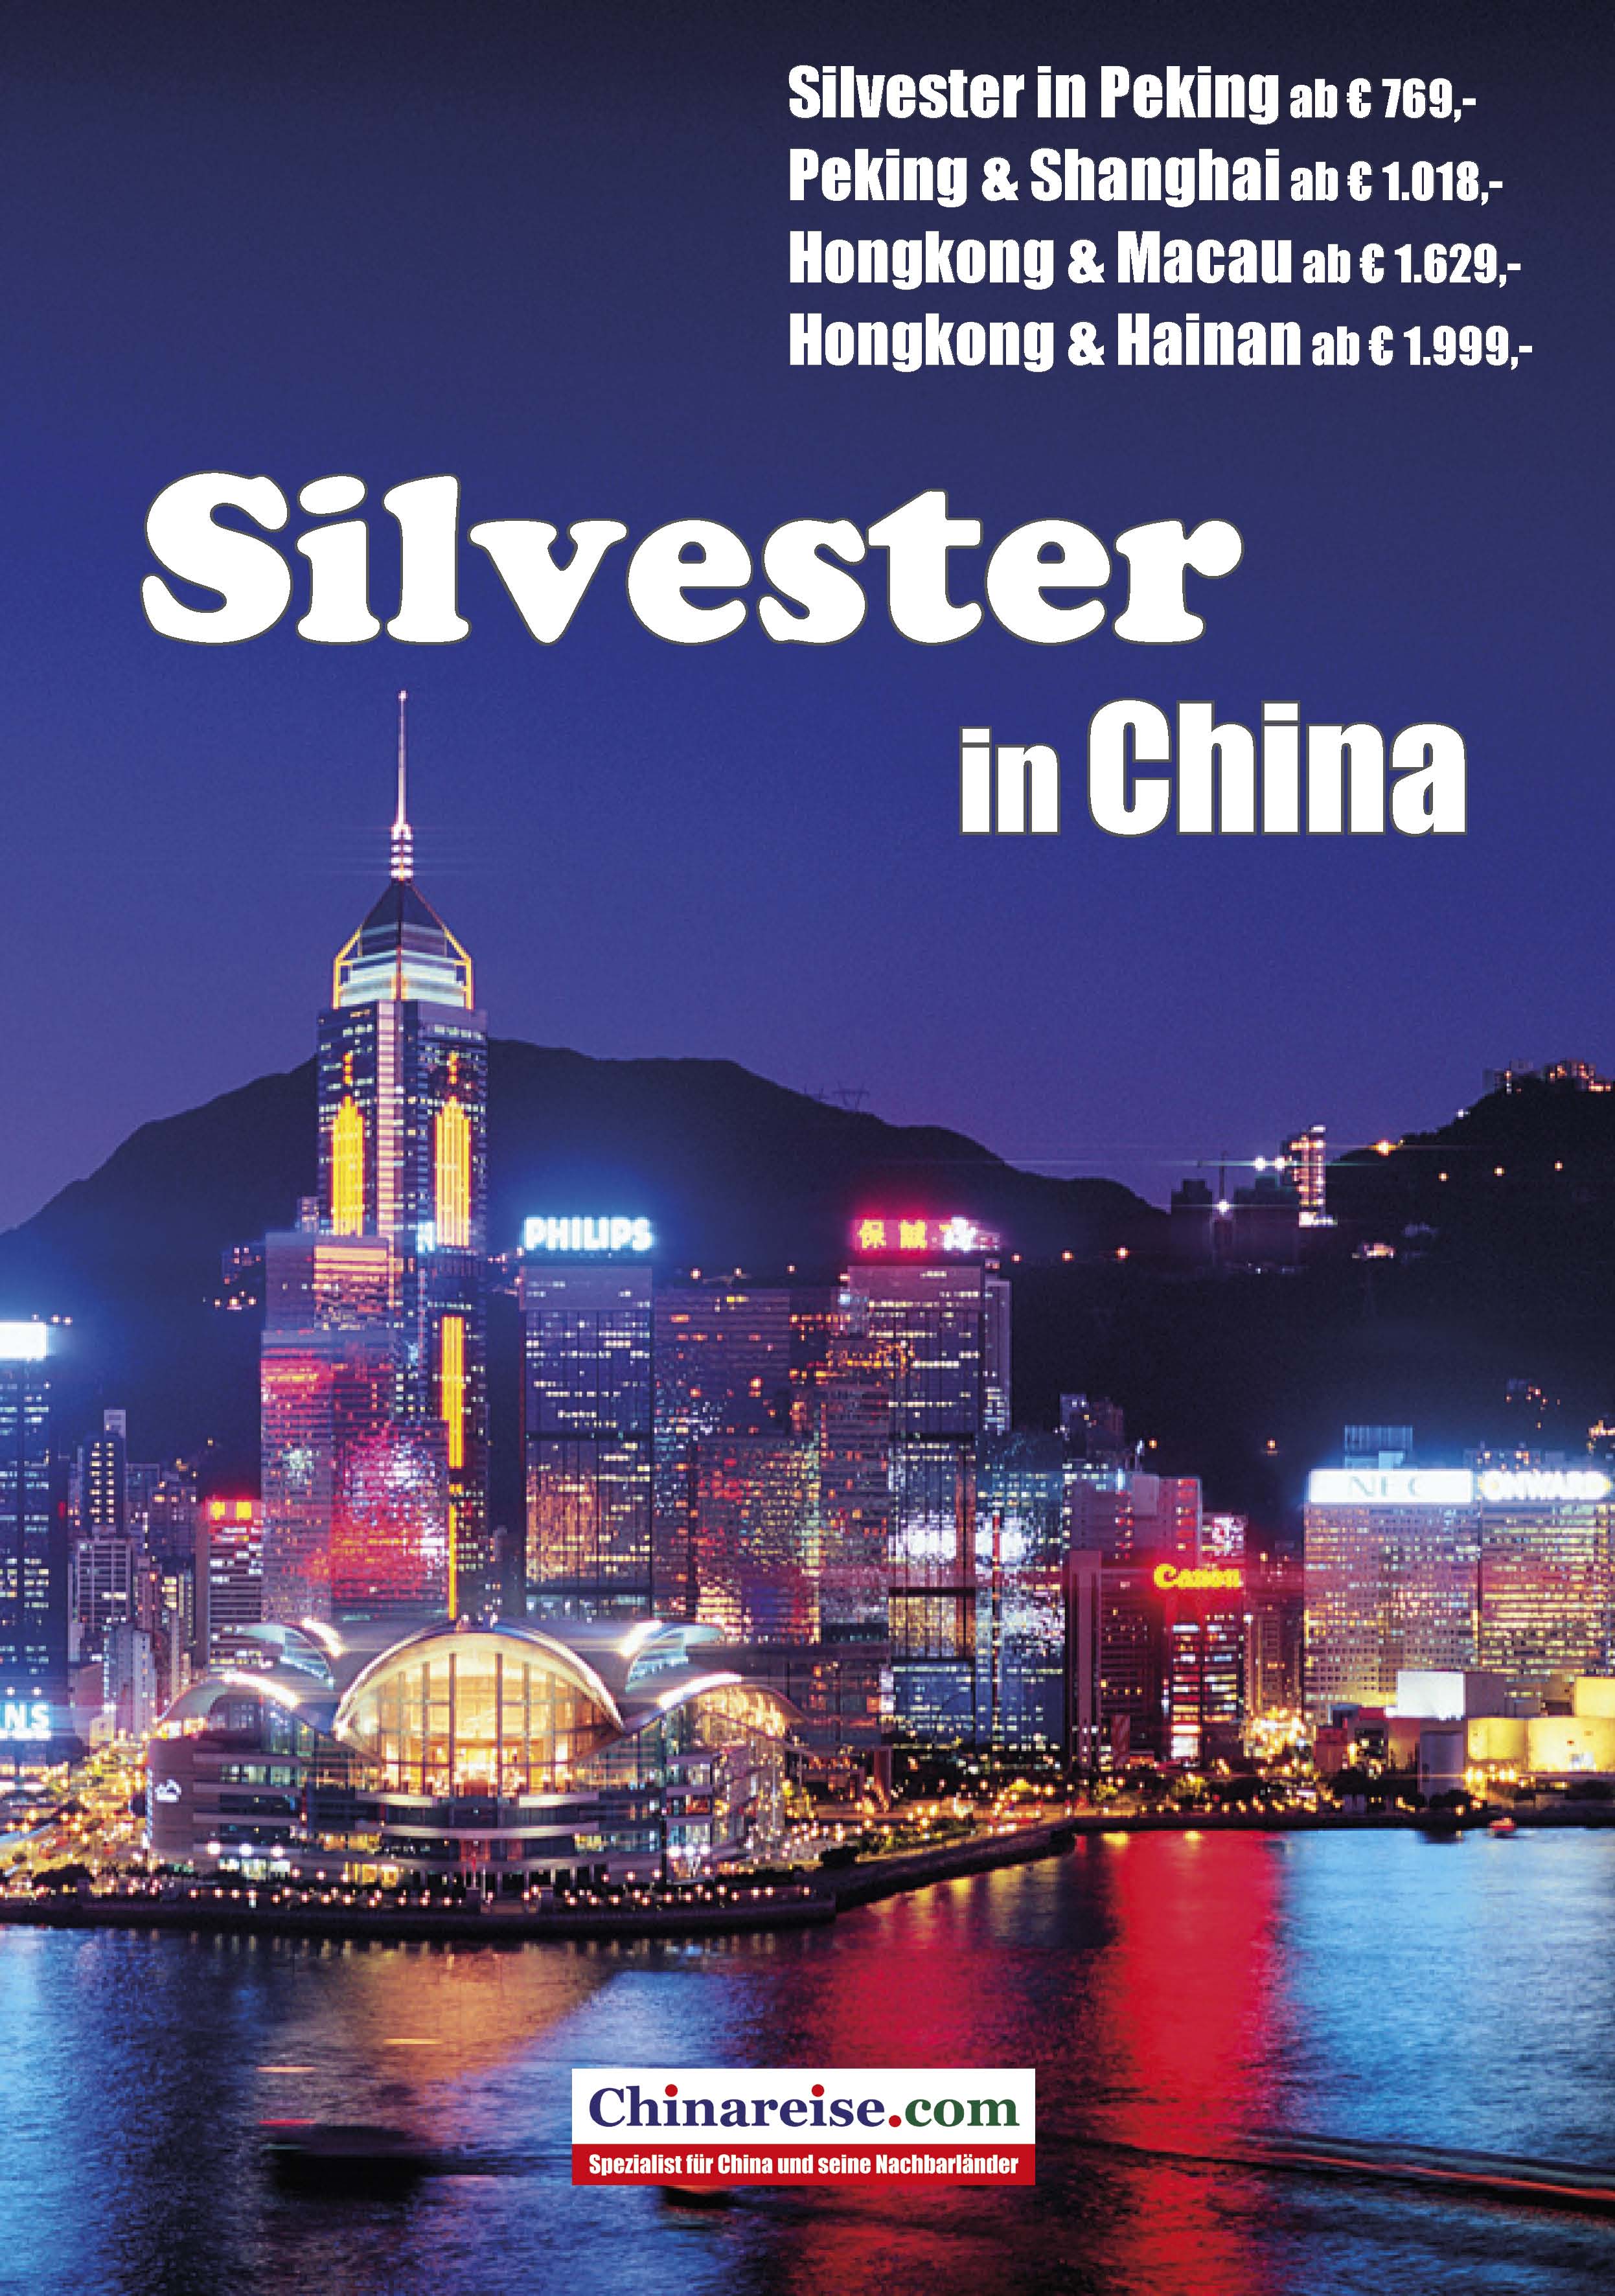 Silvester 2016 in China